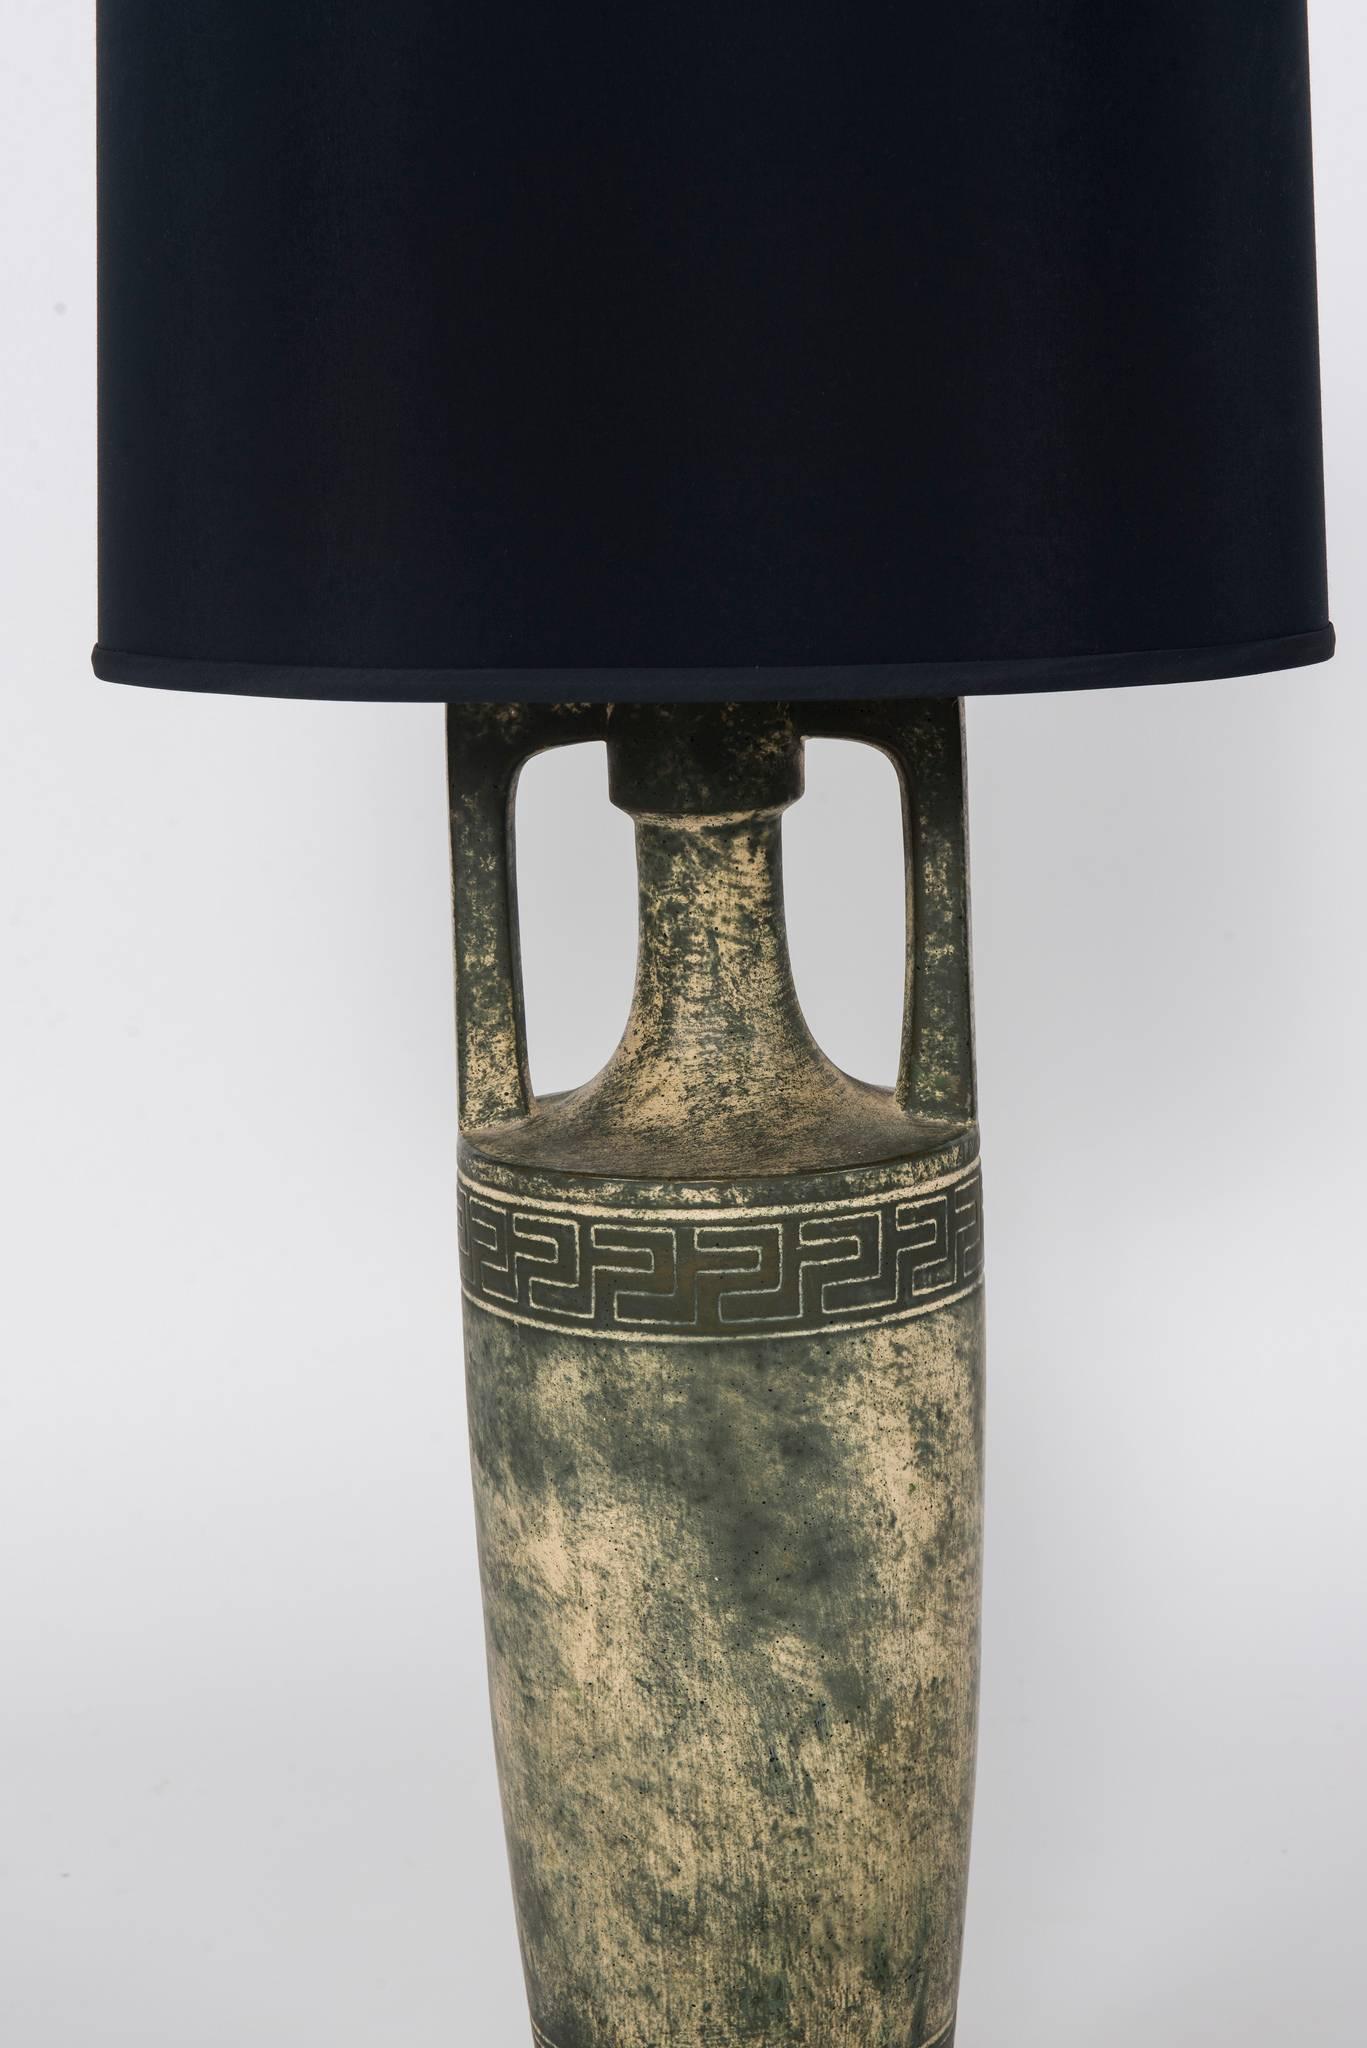 Unknown Pair of Greek Key Lamps with Black Shades